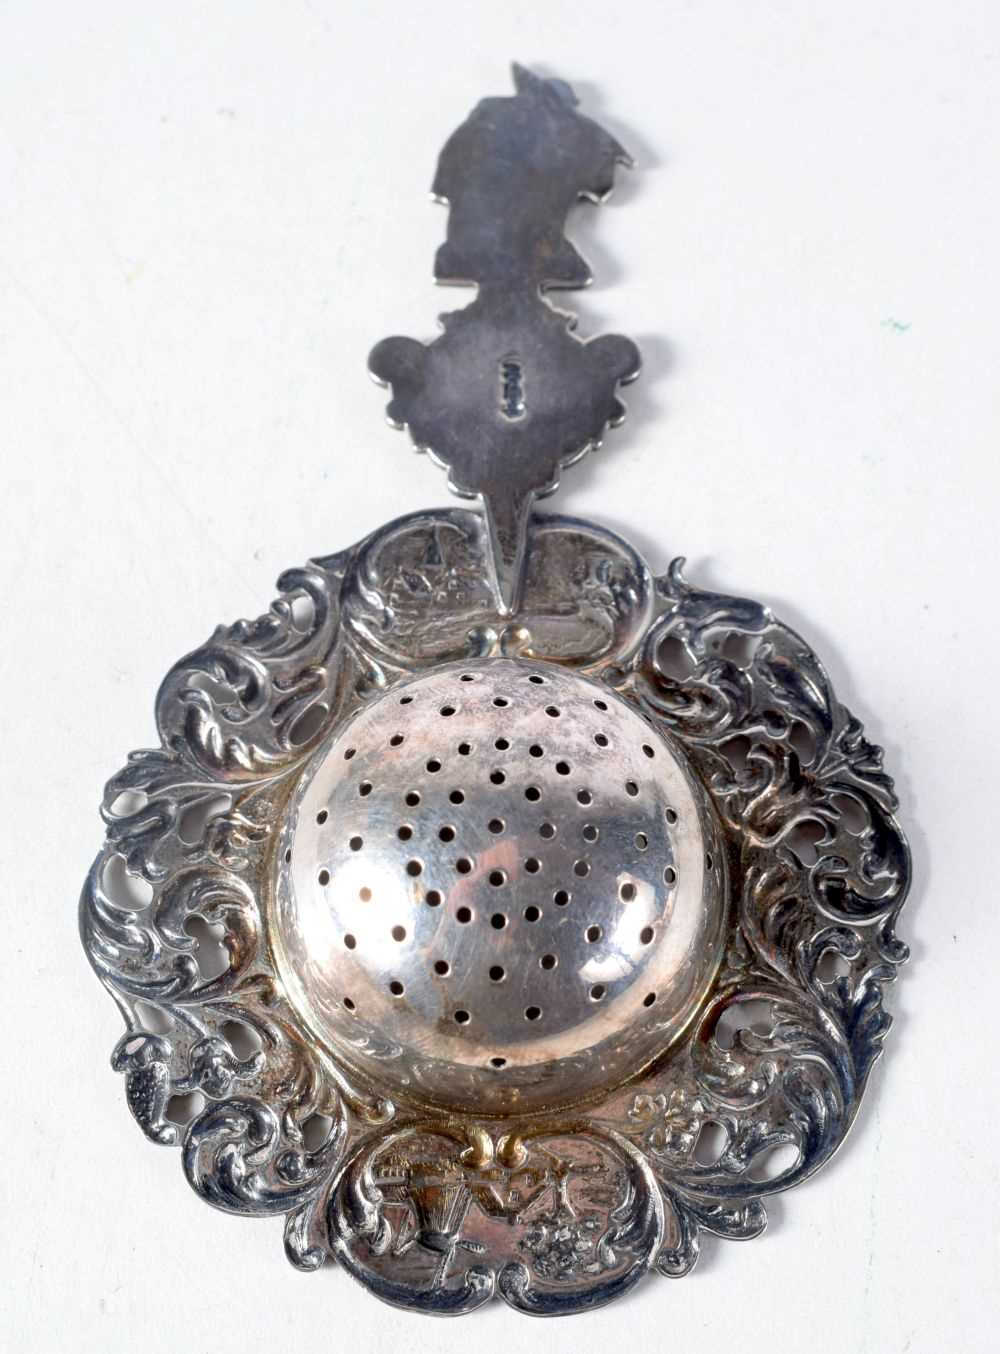 A Dutch Silver Tea Strainer with ornate decoration. 12.5 cm x 7.5 cm, weight 41g - Image 2 of 17